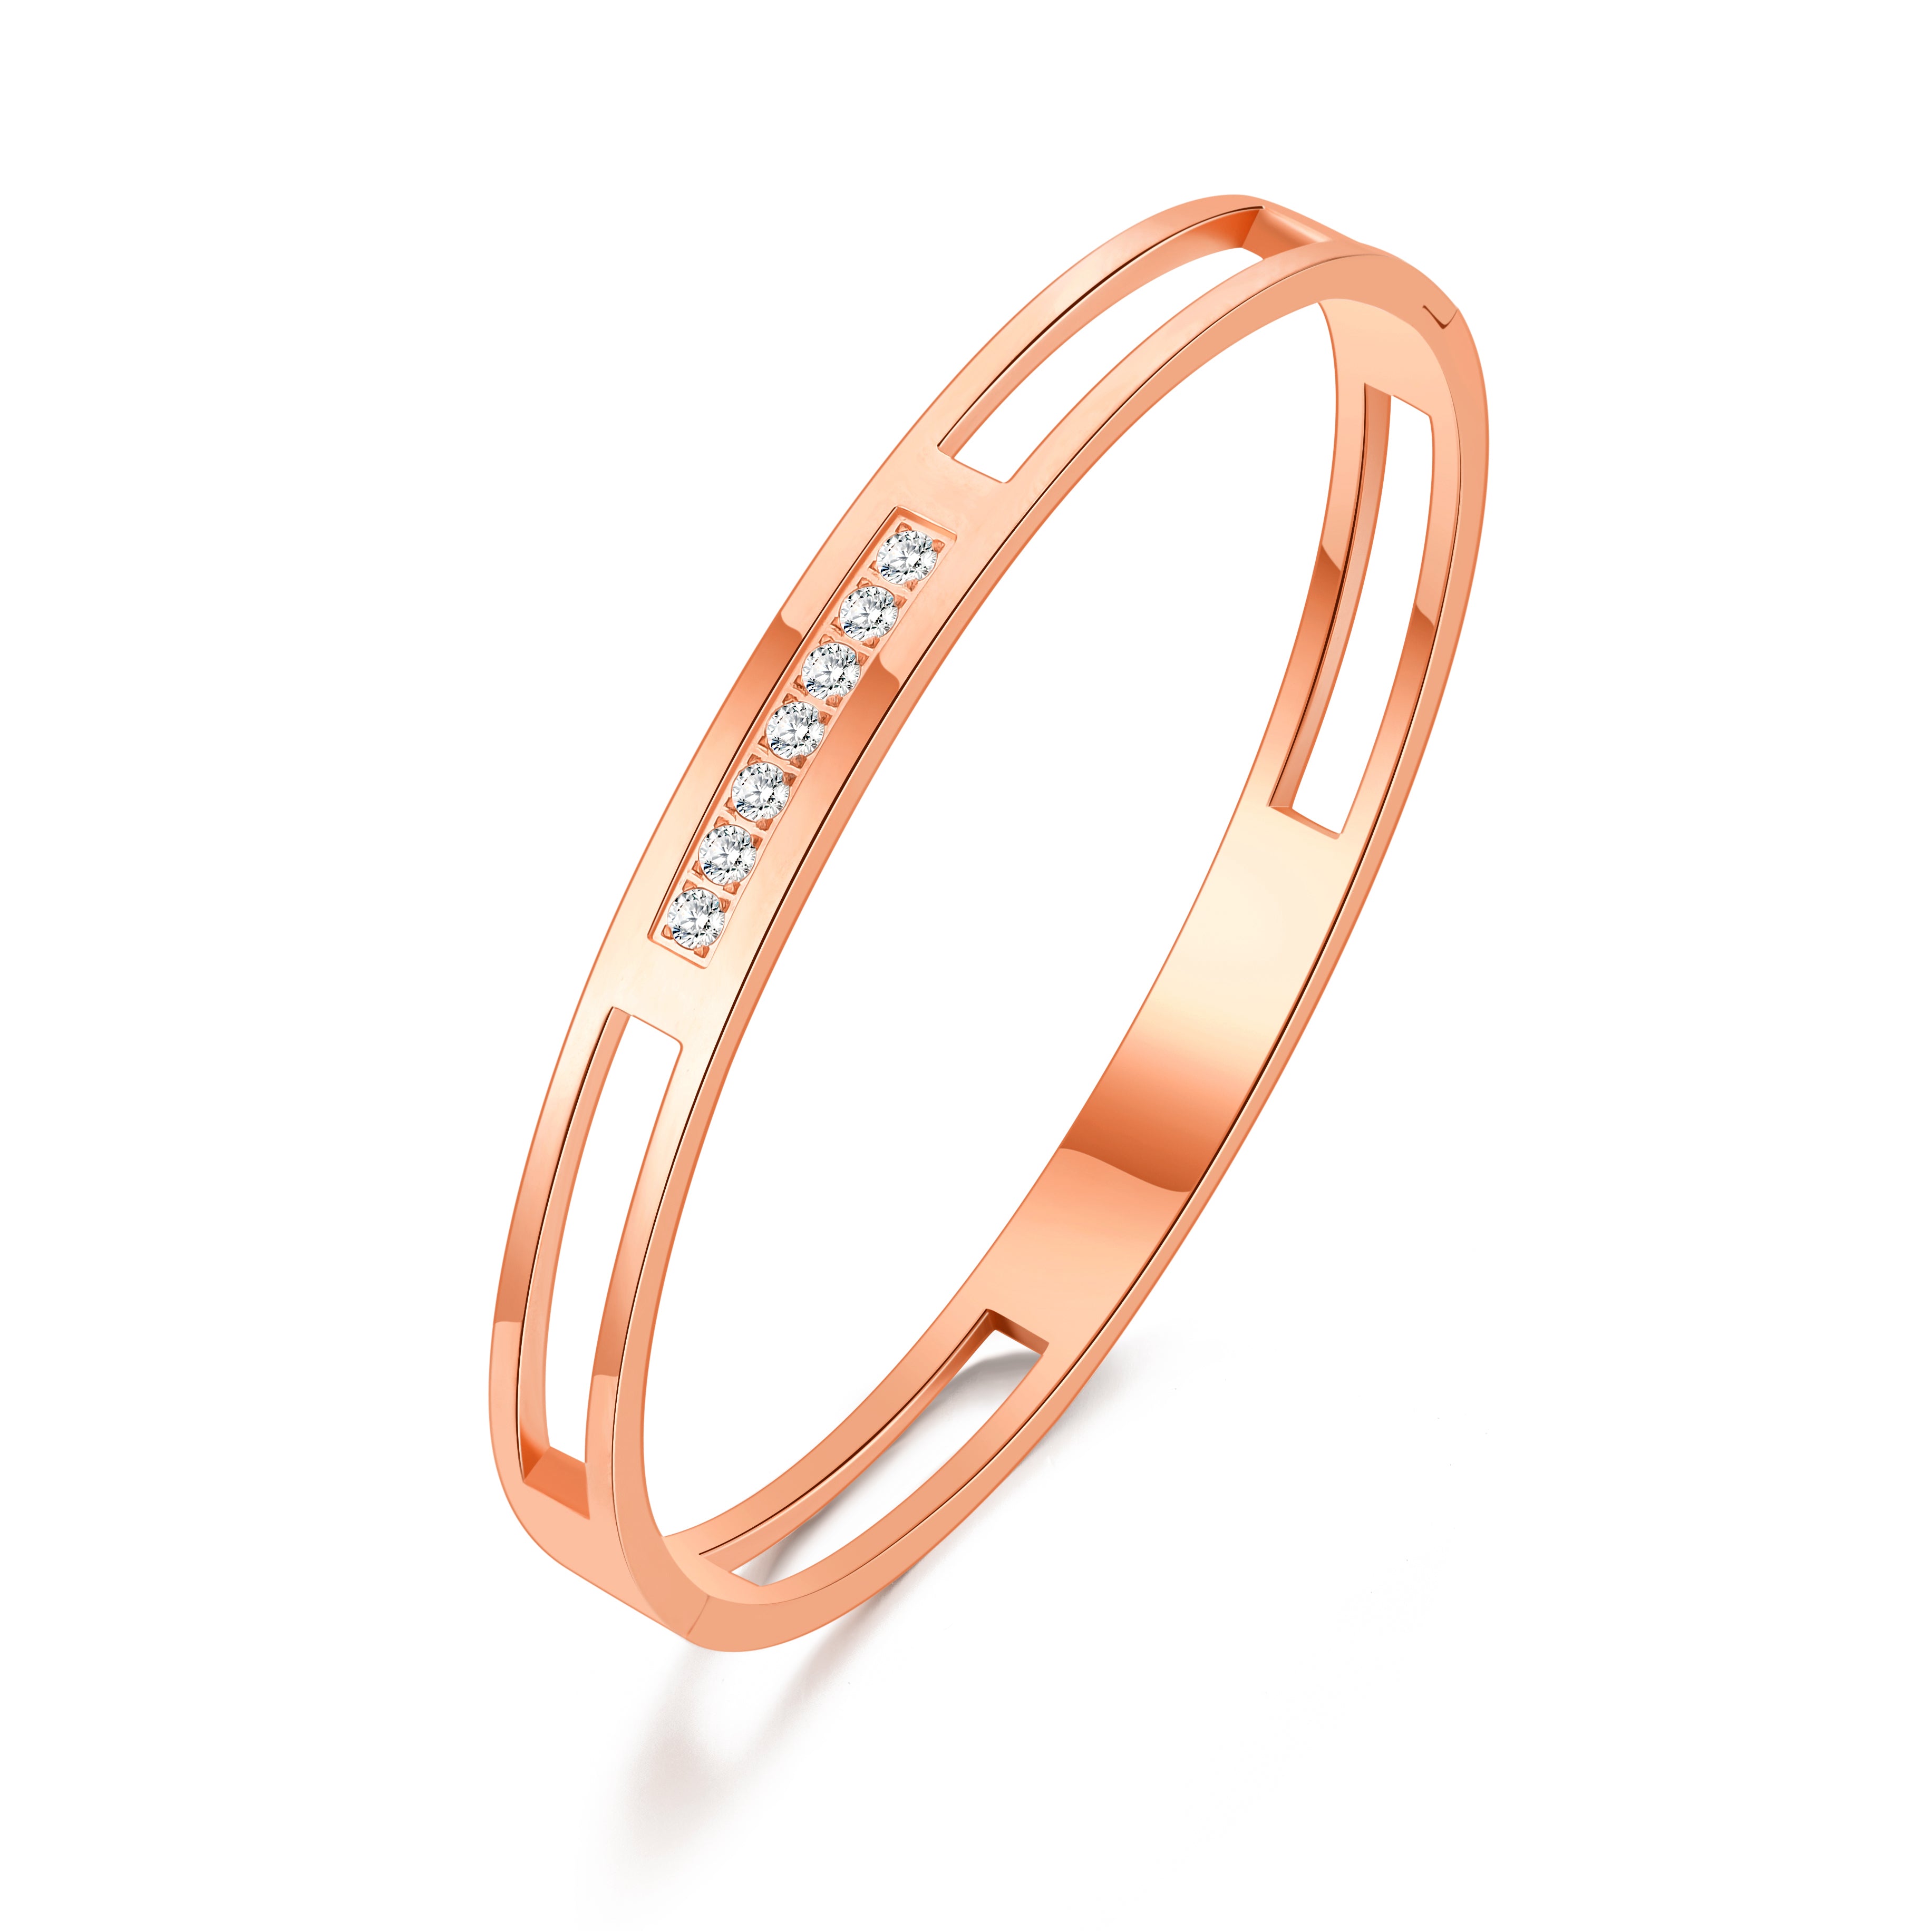 Rose Gold Plated Stainless Steel Channel Bangle Created with Zircondia® Crystals by Philip Jones Jewellery